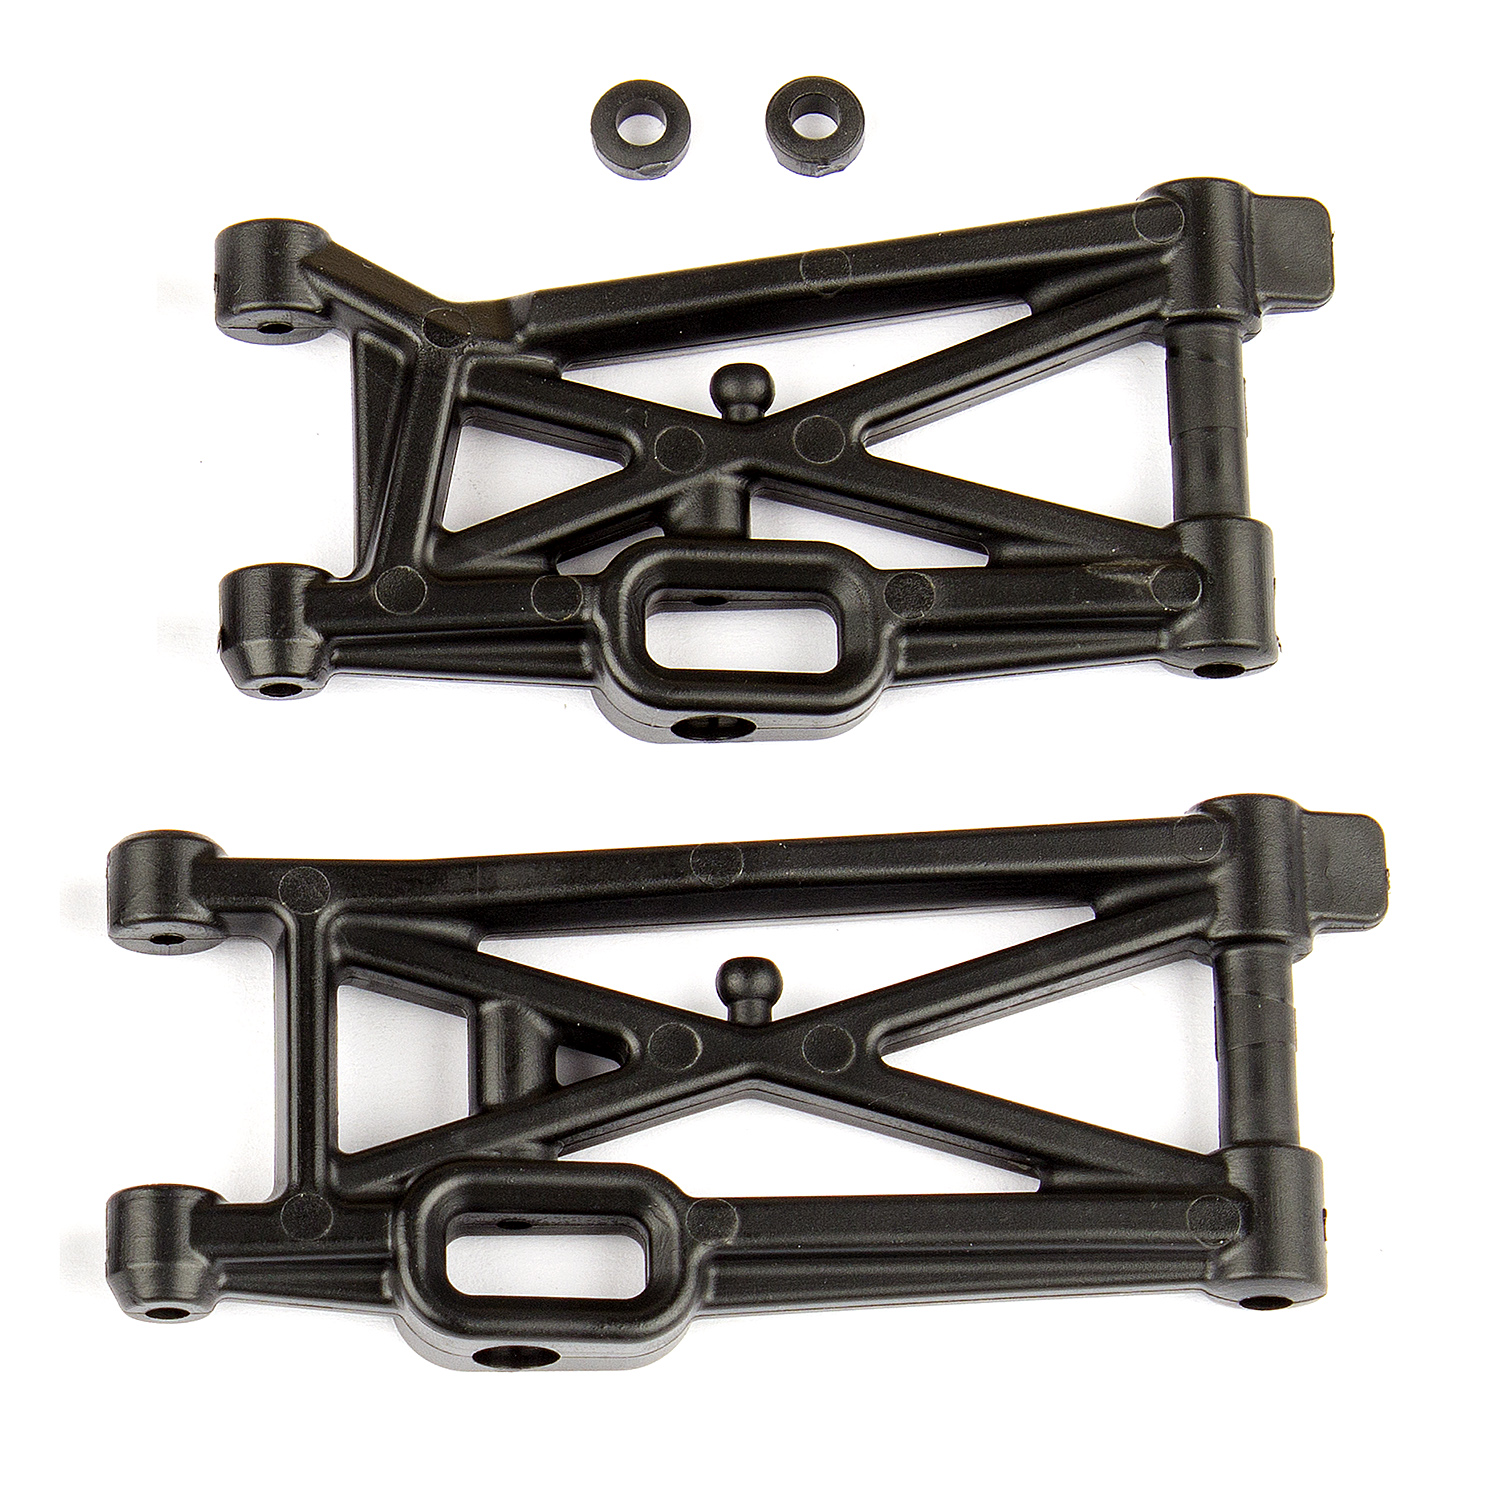 14B Front and Rear Suspension Arms (1 each) and Spacers